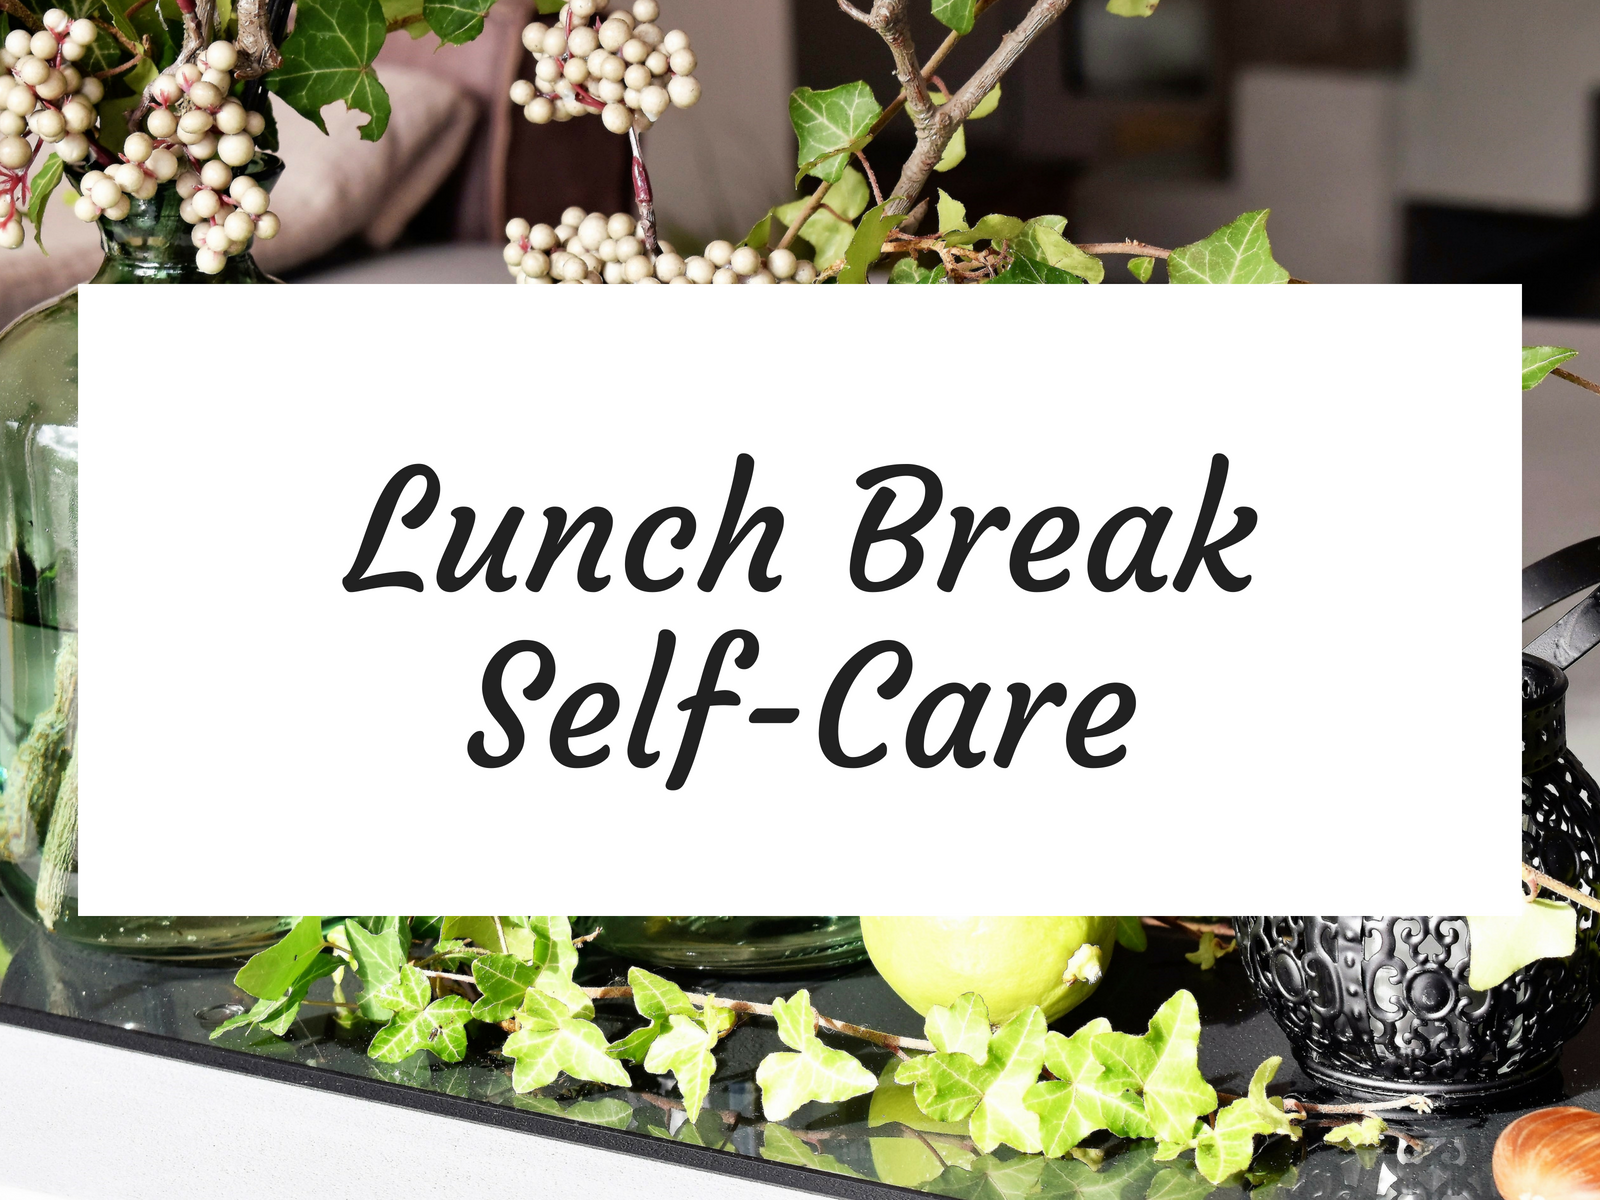 If you are feeling the need for a little work time self-care, try these tips and recharge over lunch.